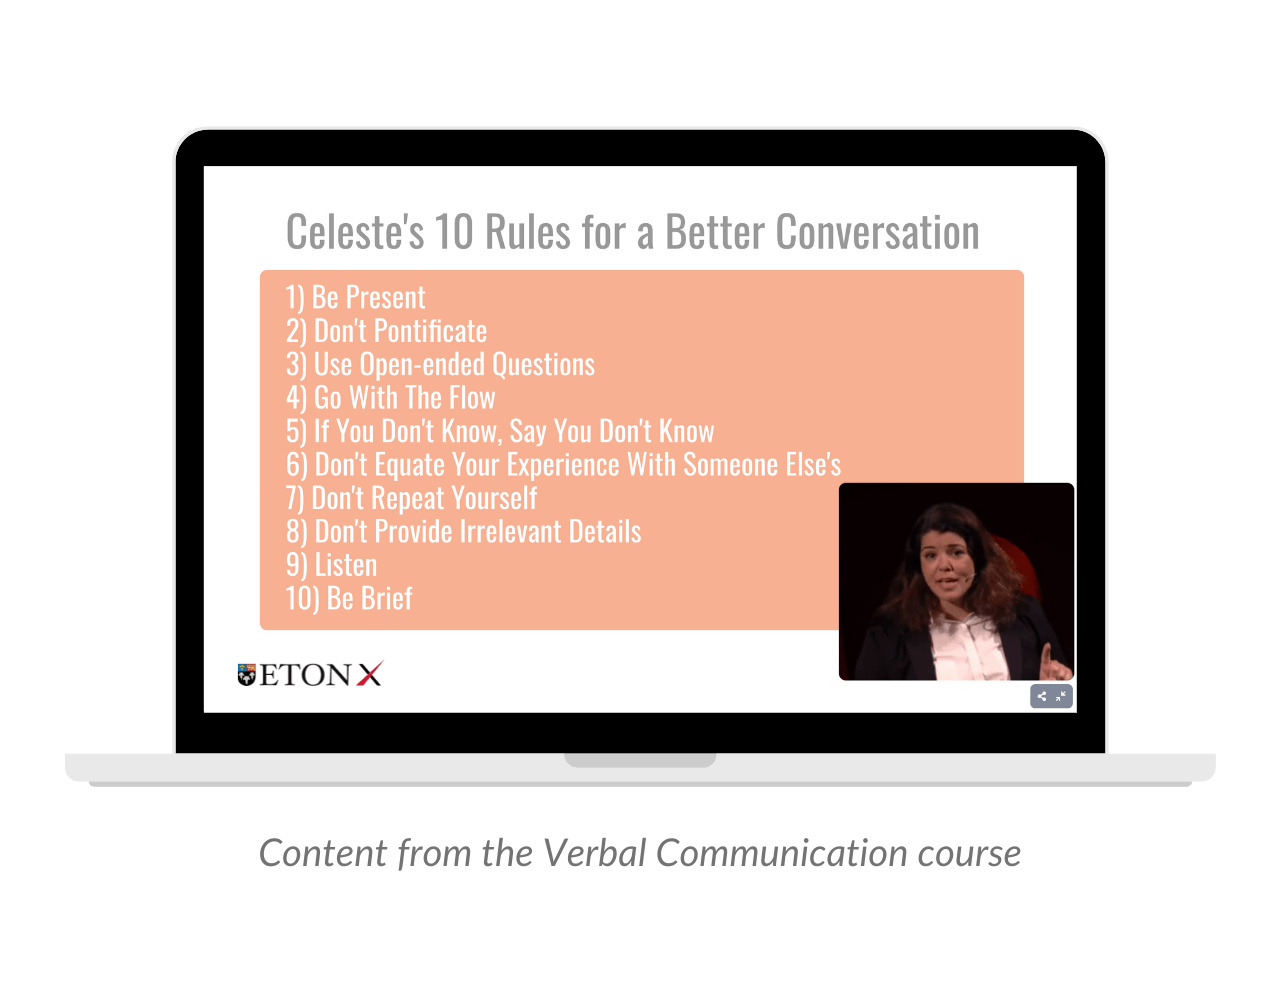 Celeste's 10 Rules for a Better Conversation - Image from Verbal Communication Course.